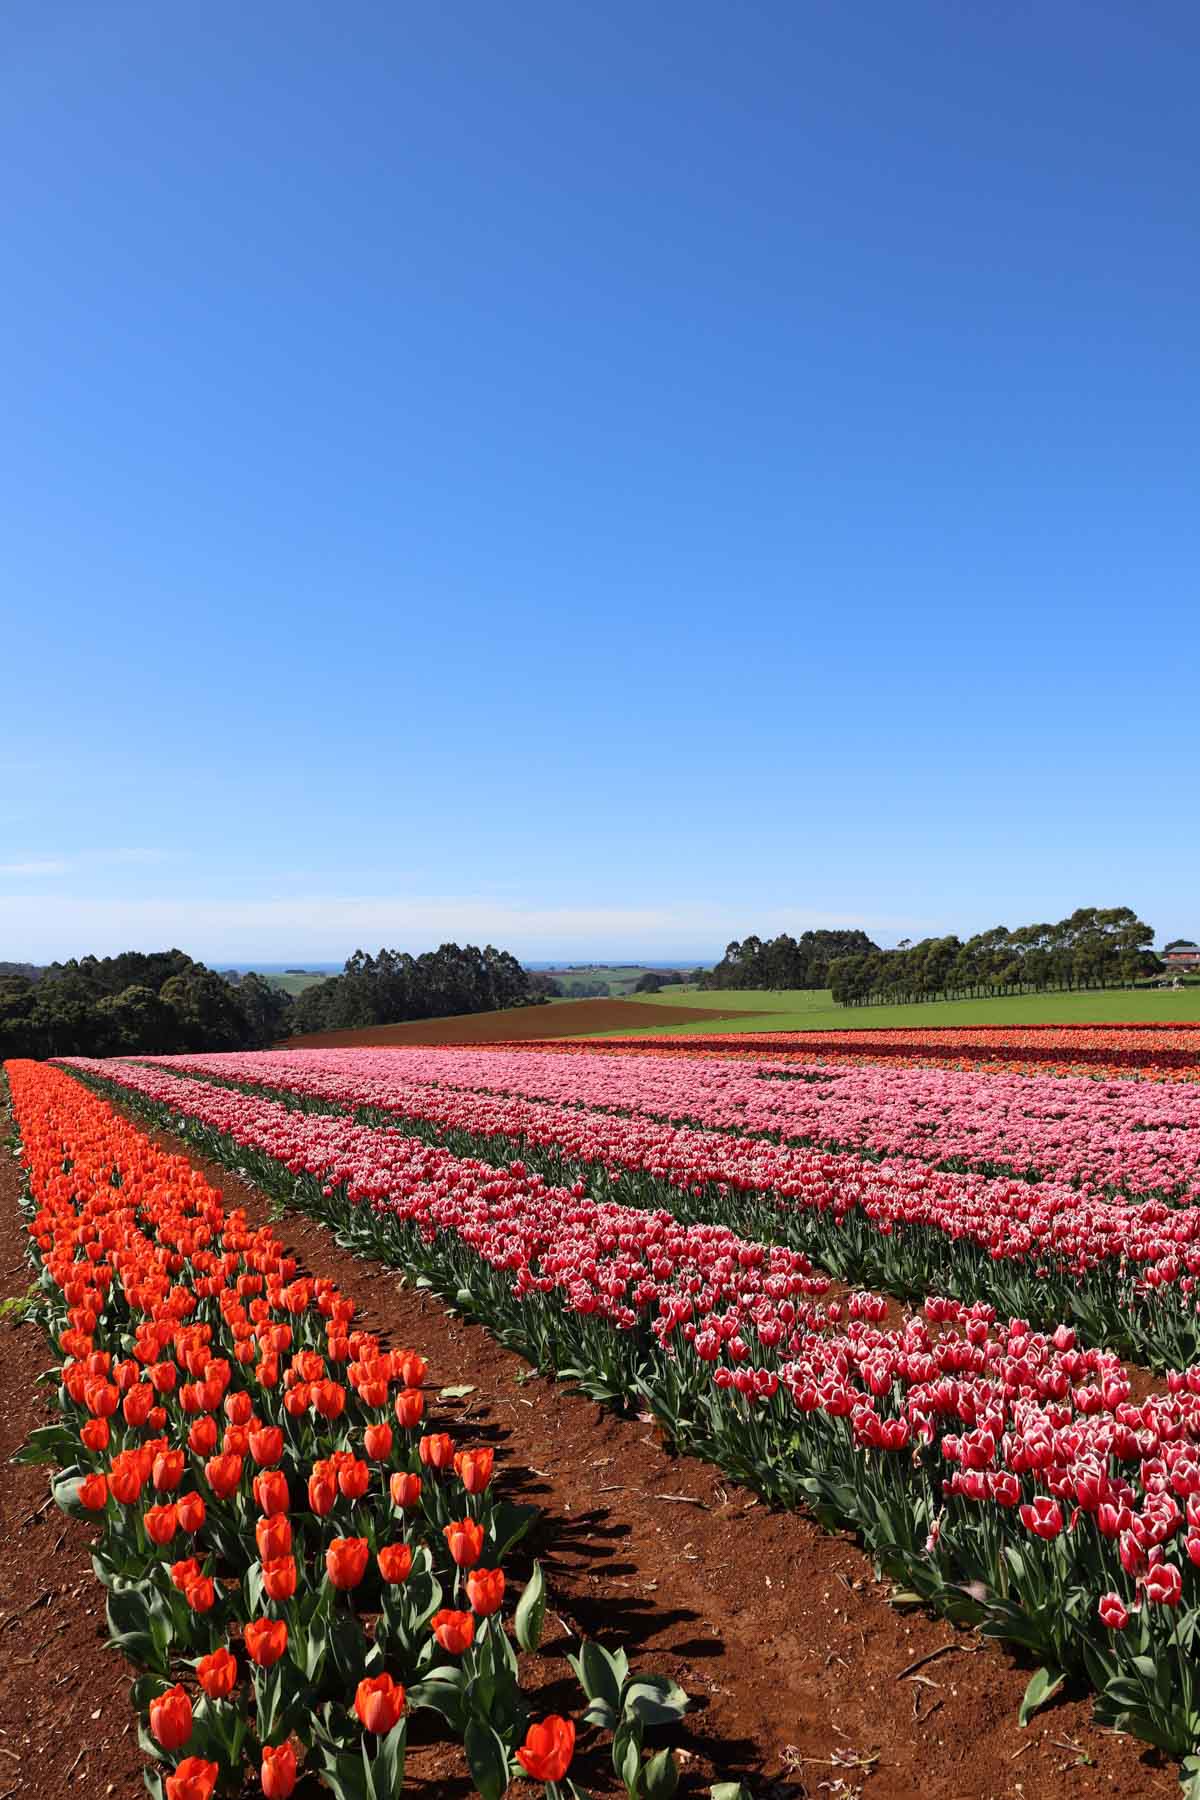 Coastline Tours Tasmania presents an enchanting journey to a private tulip farm. Discover the North-West's charm, book your spot now!